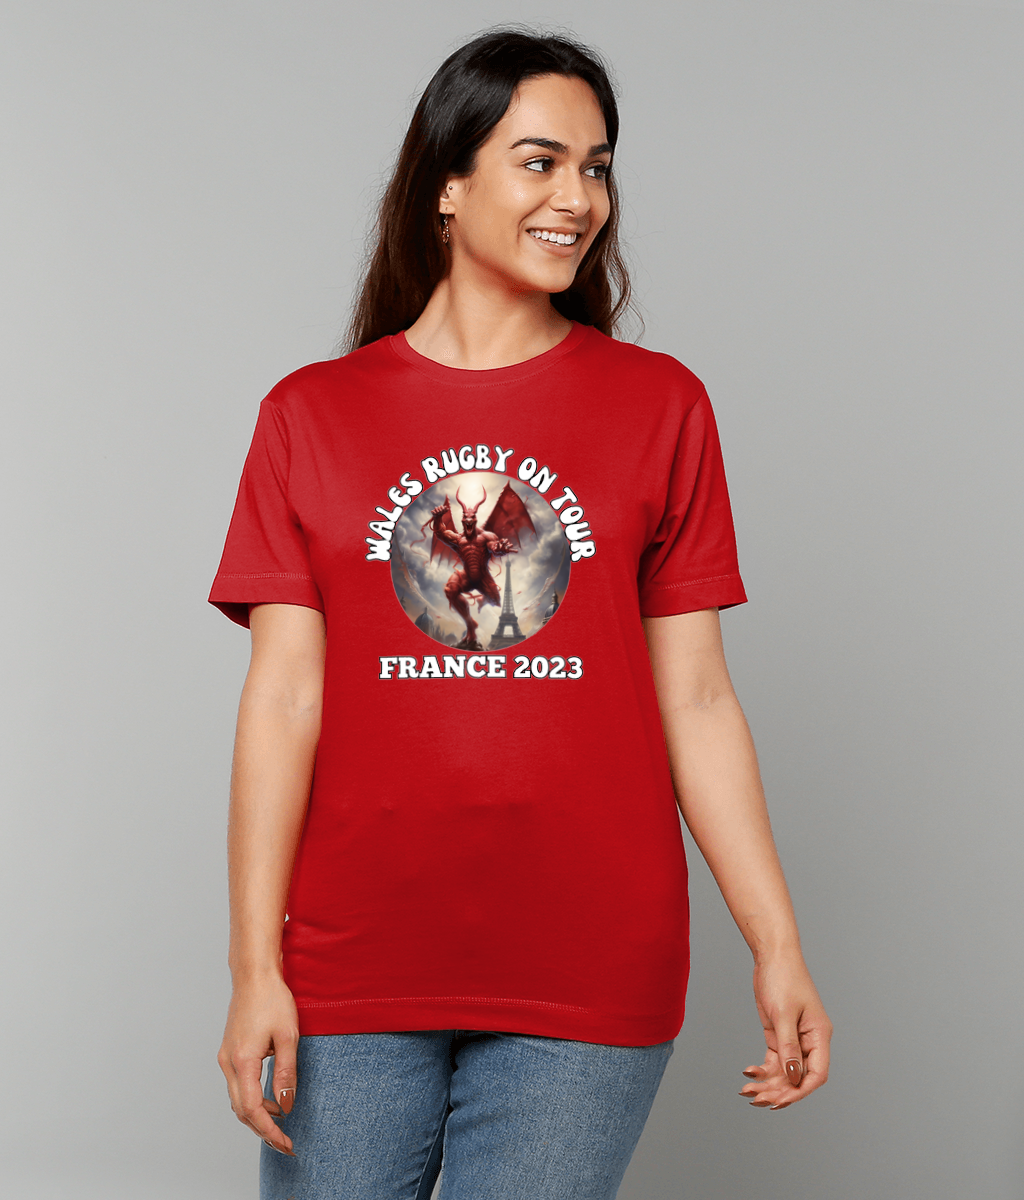 Wales Rugby On Tour - France 2023 Women's T Shirt